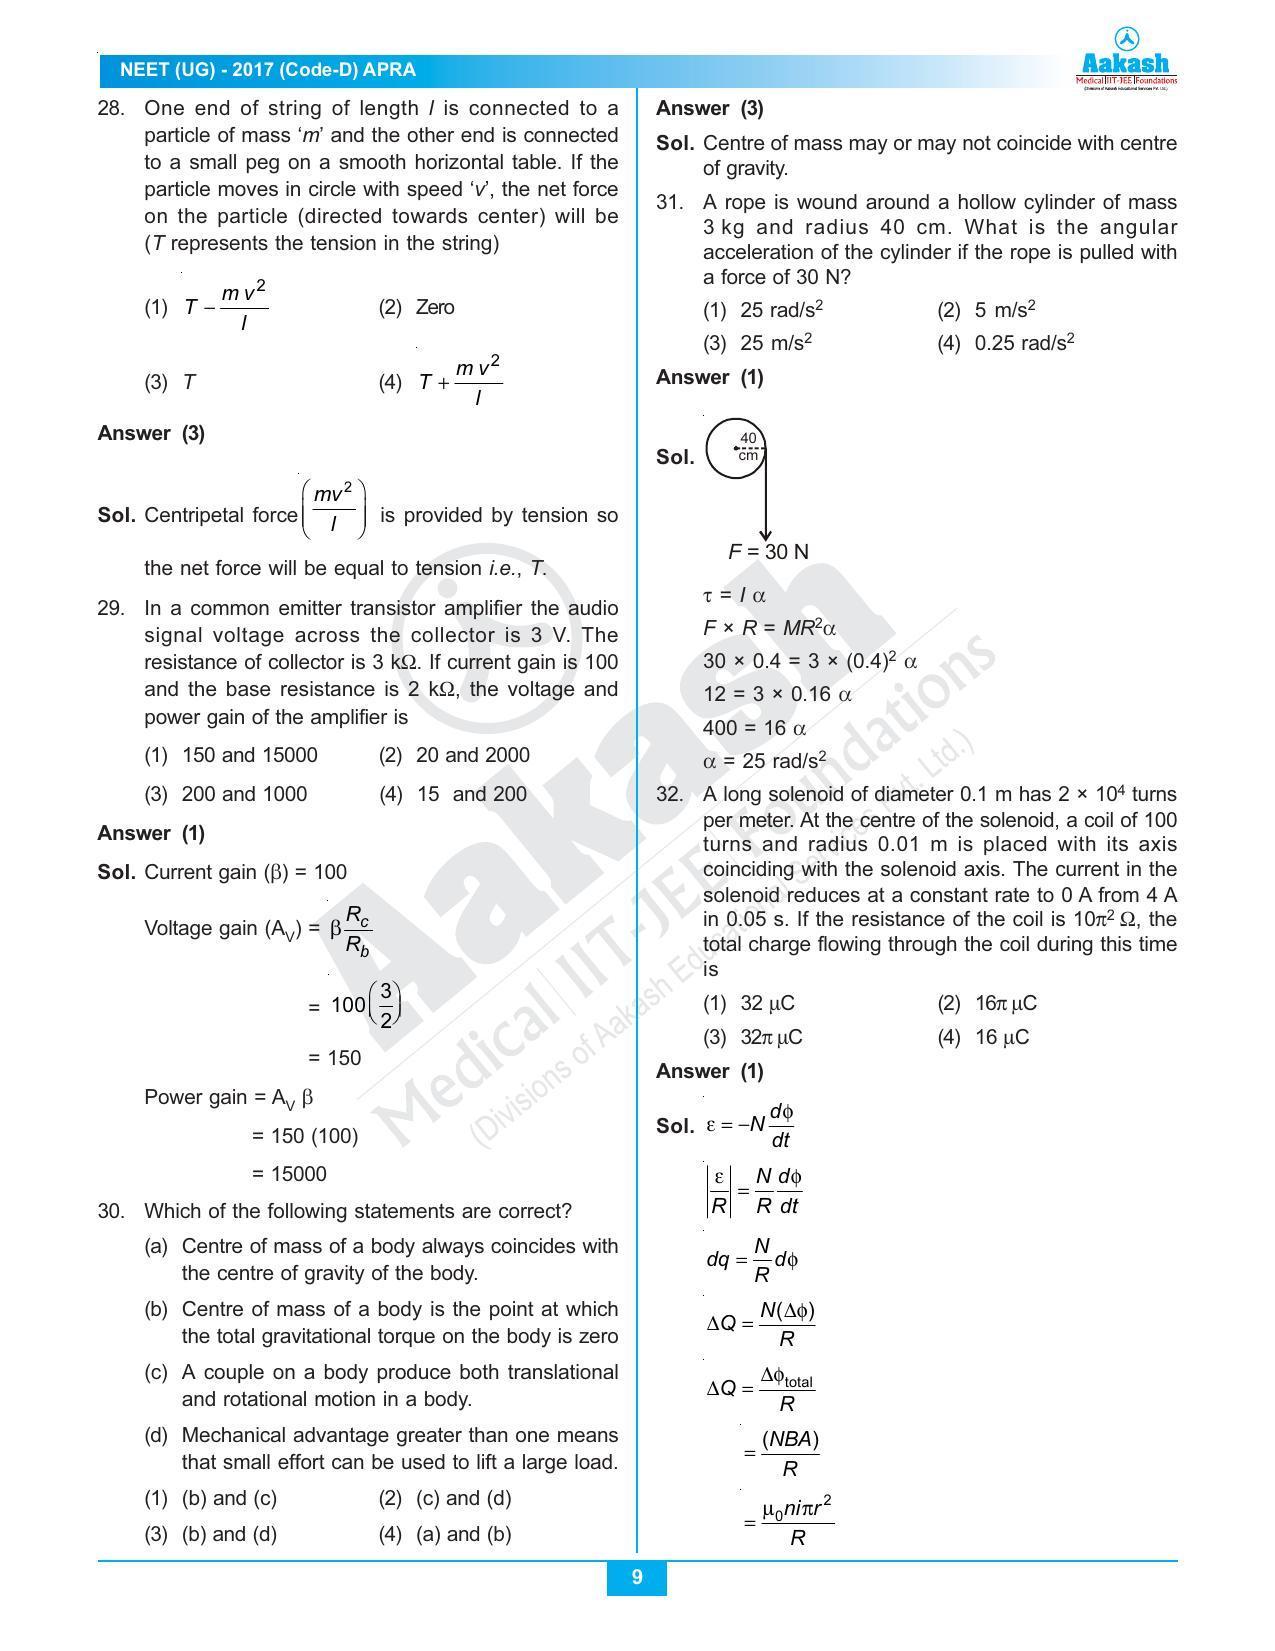  NEET Code D 2017 Answer & Solutions - Page 9